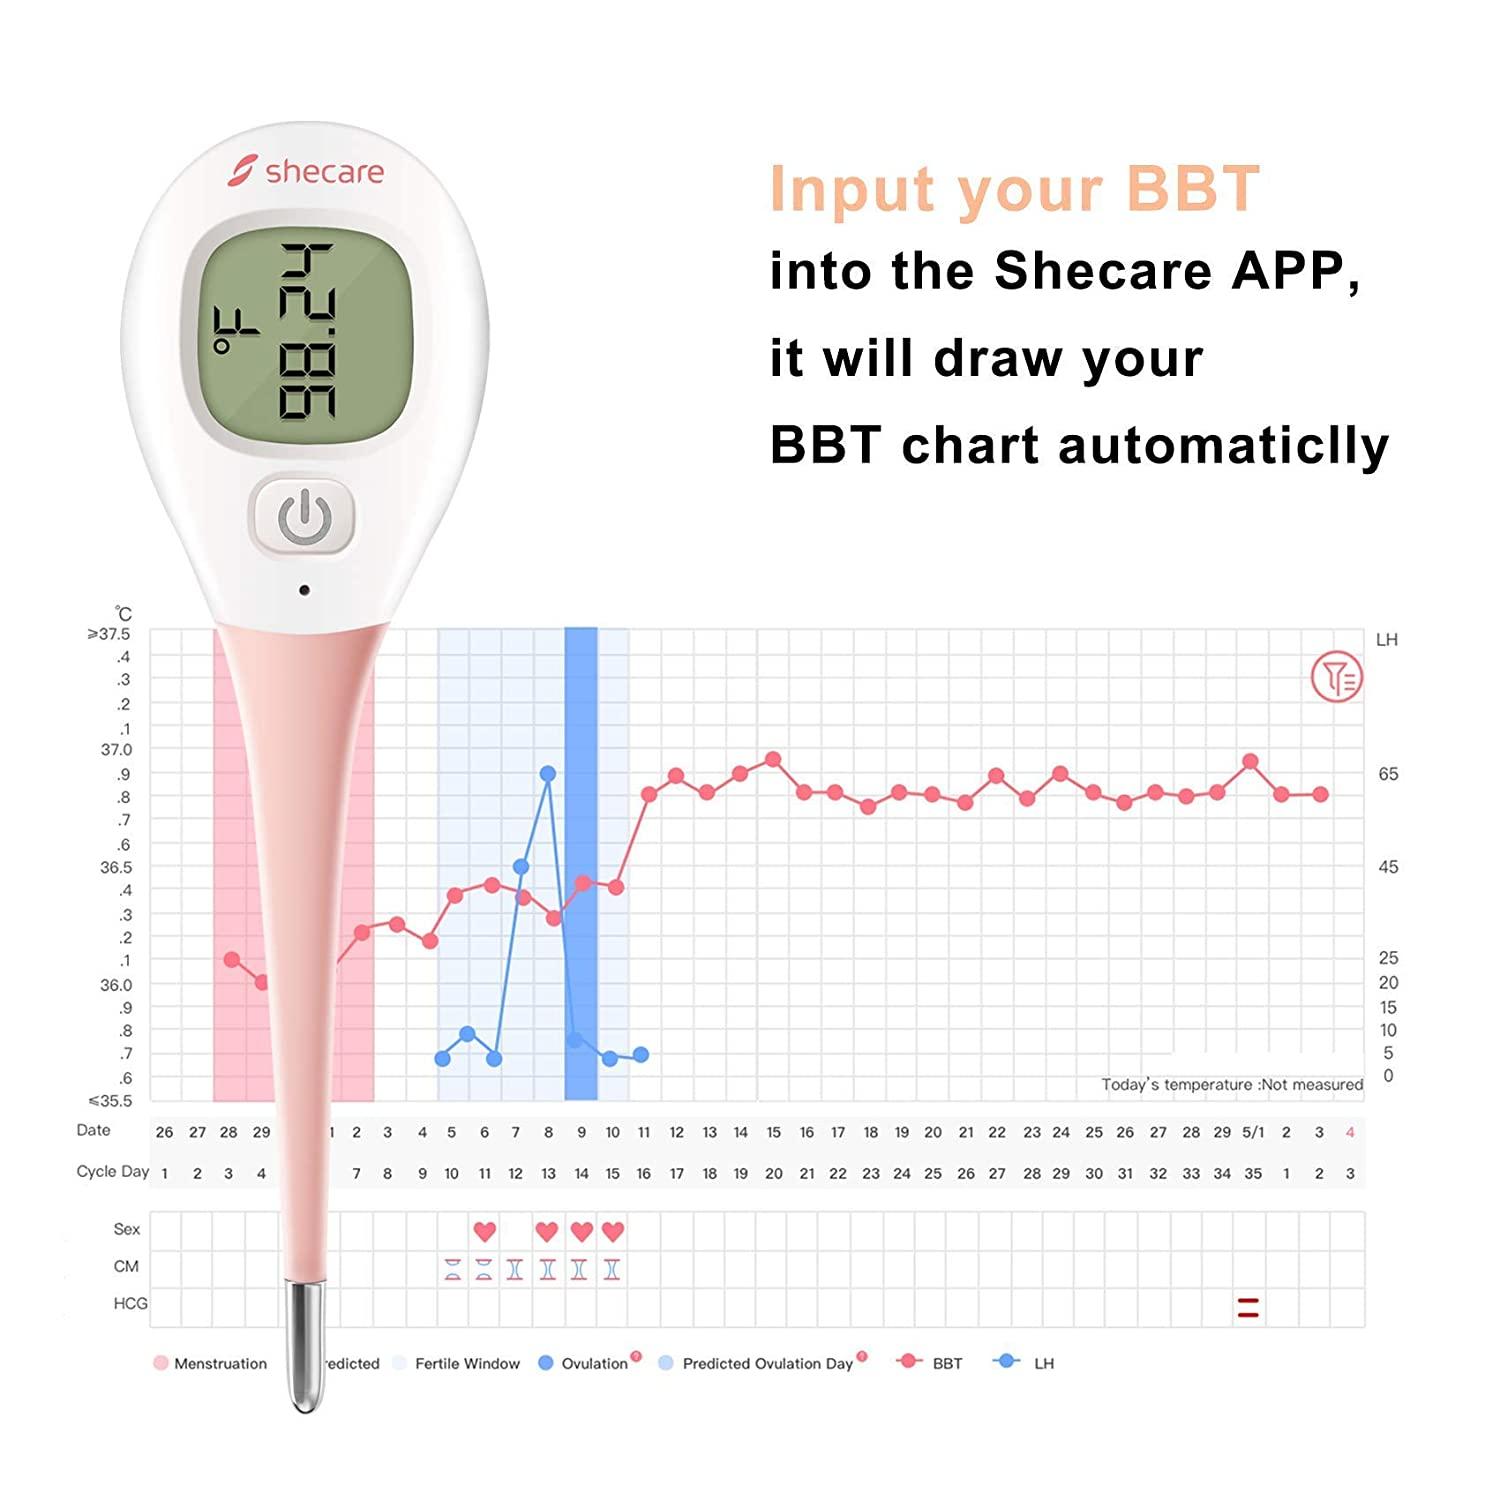 femometer Body Temperature Thermometer, Digital Basal Thermometer for  Fertility Monitor, Draw BBT Chart Pinpoint Ovulation Day, Accurate & Easy  to